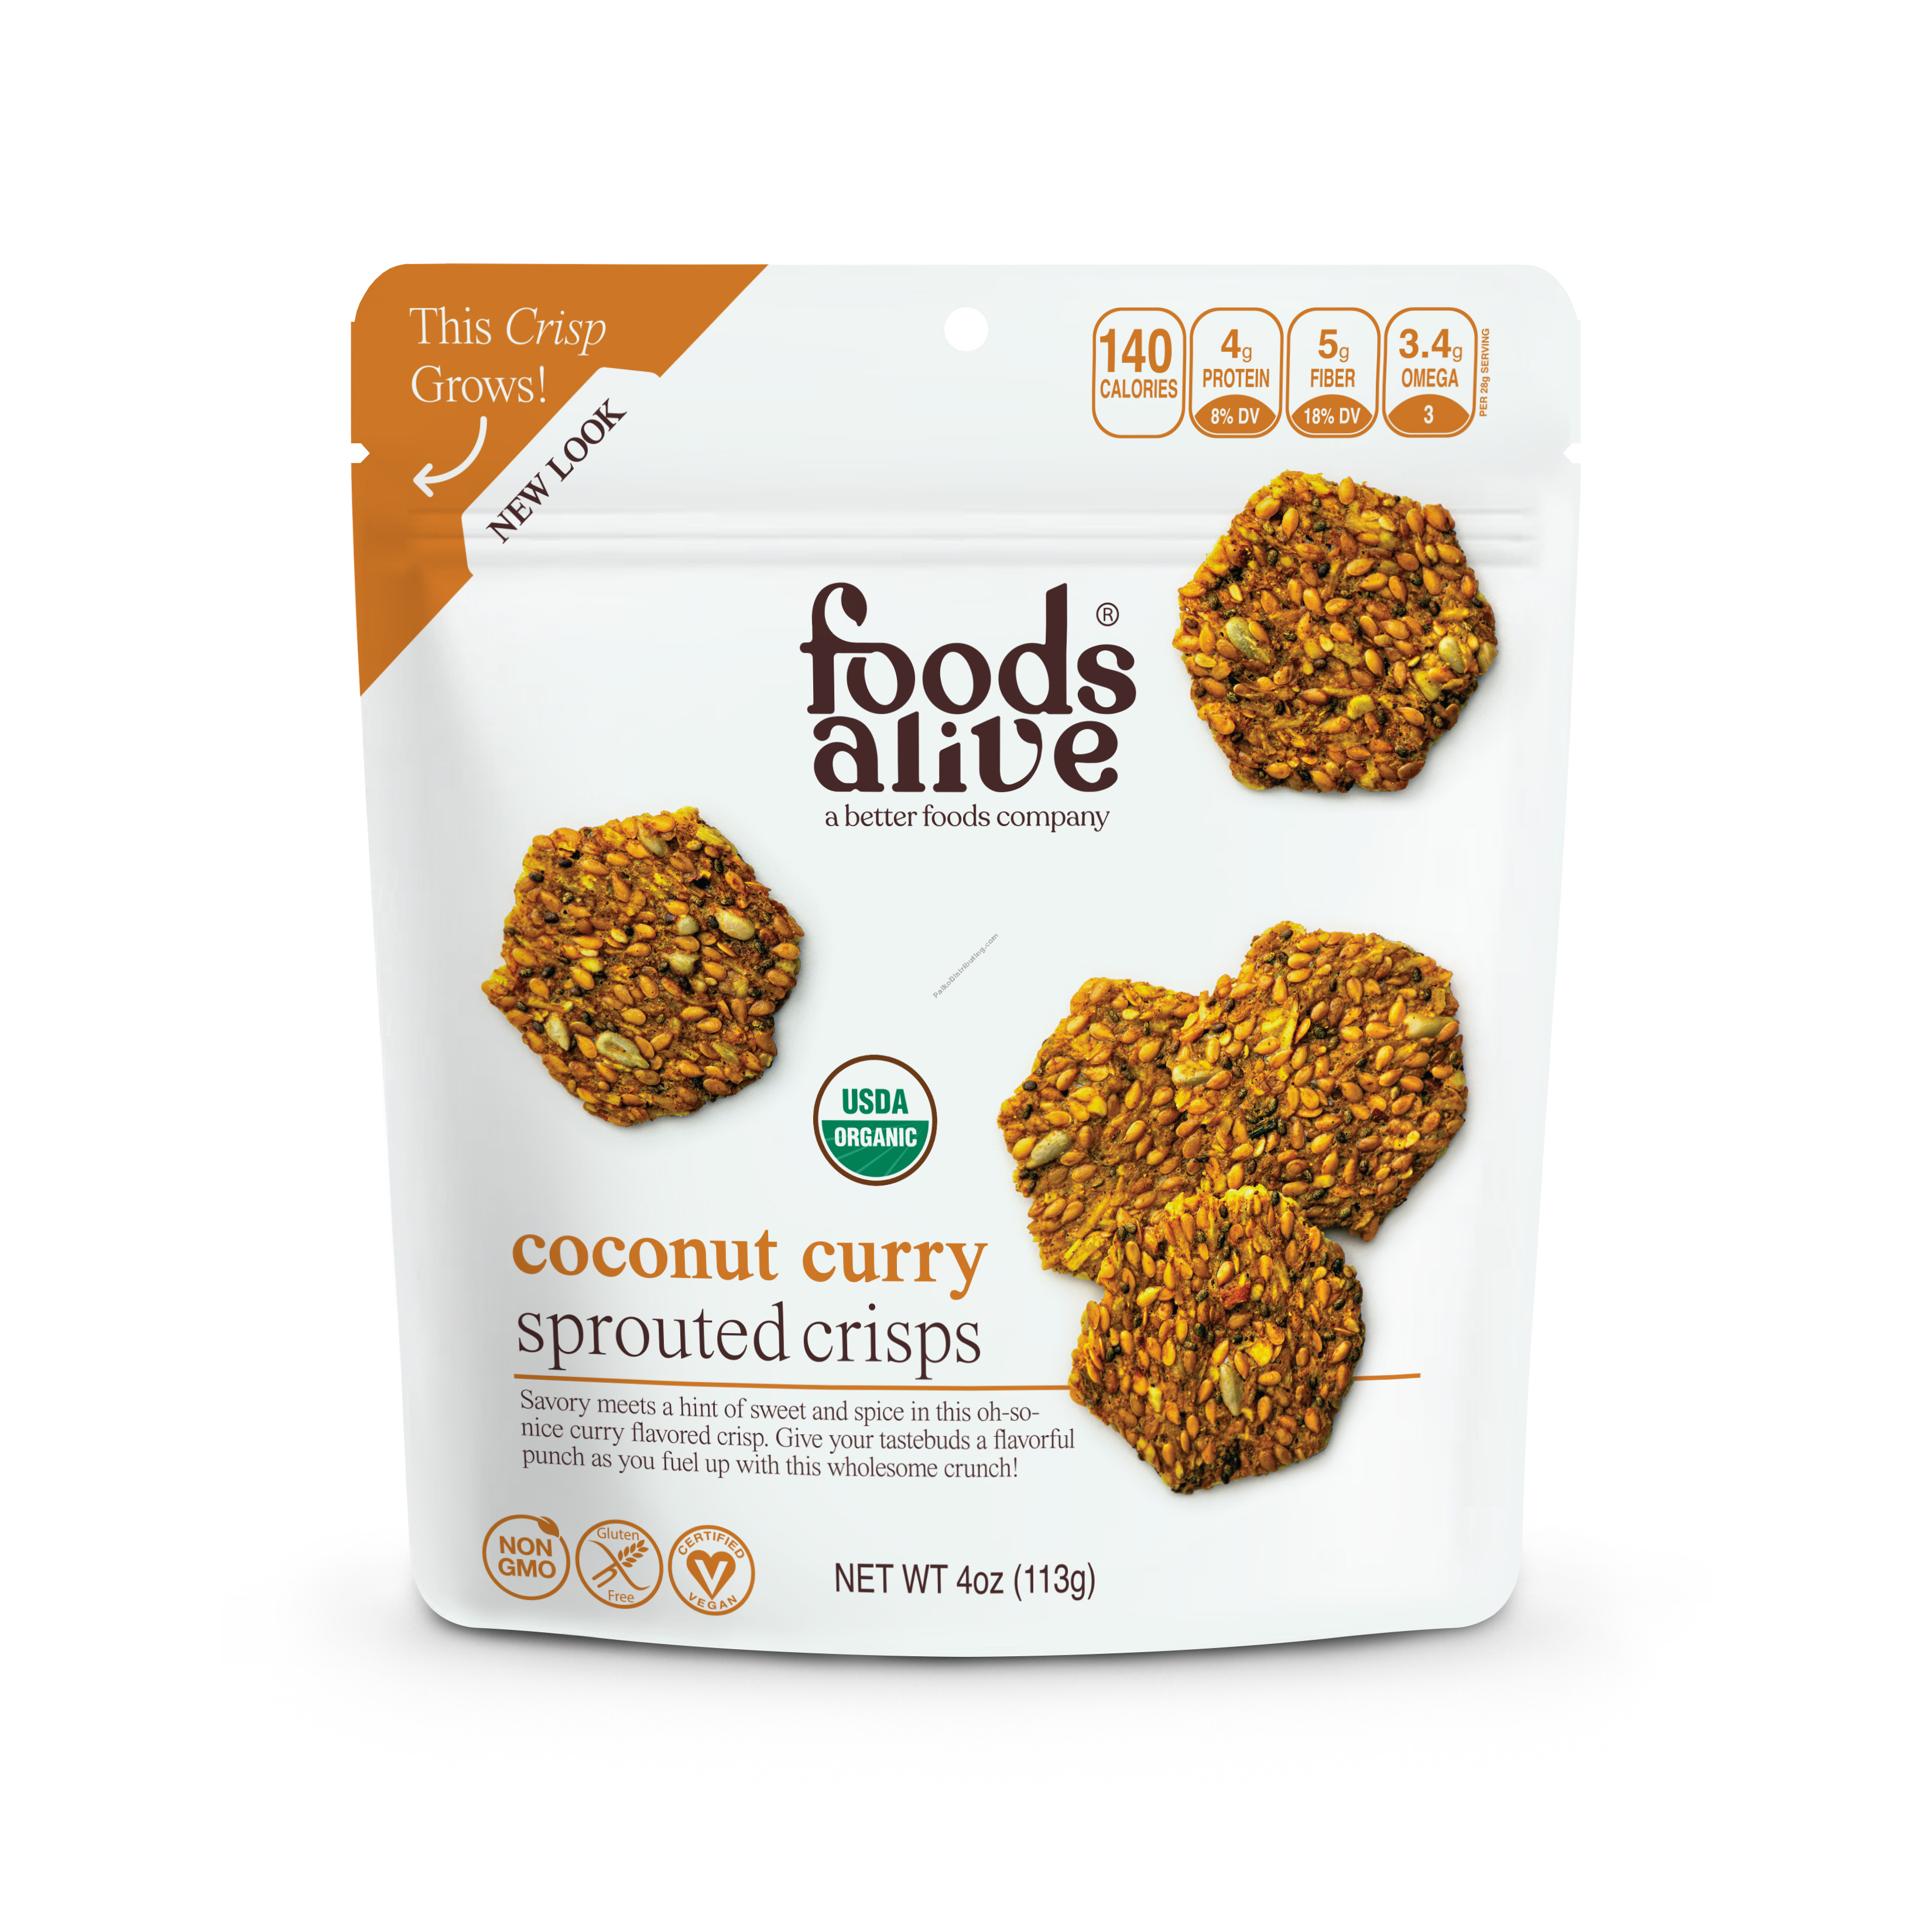 Product Image: Coconut Curry Sprouted Crisps